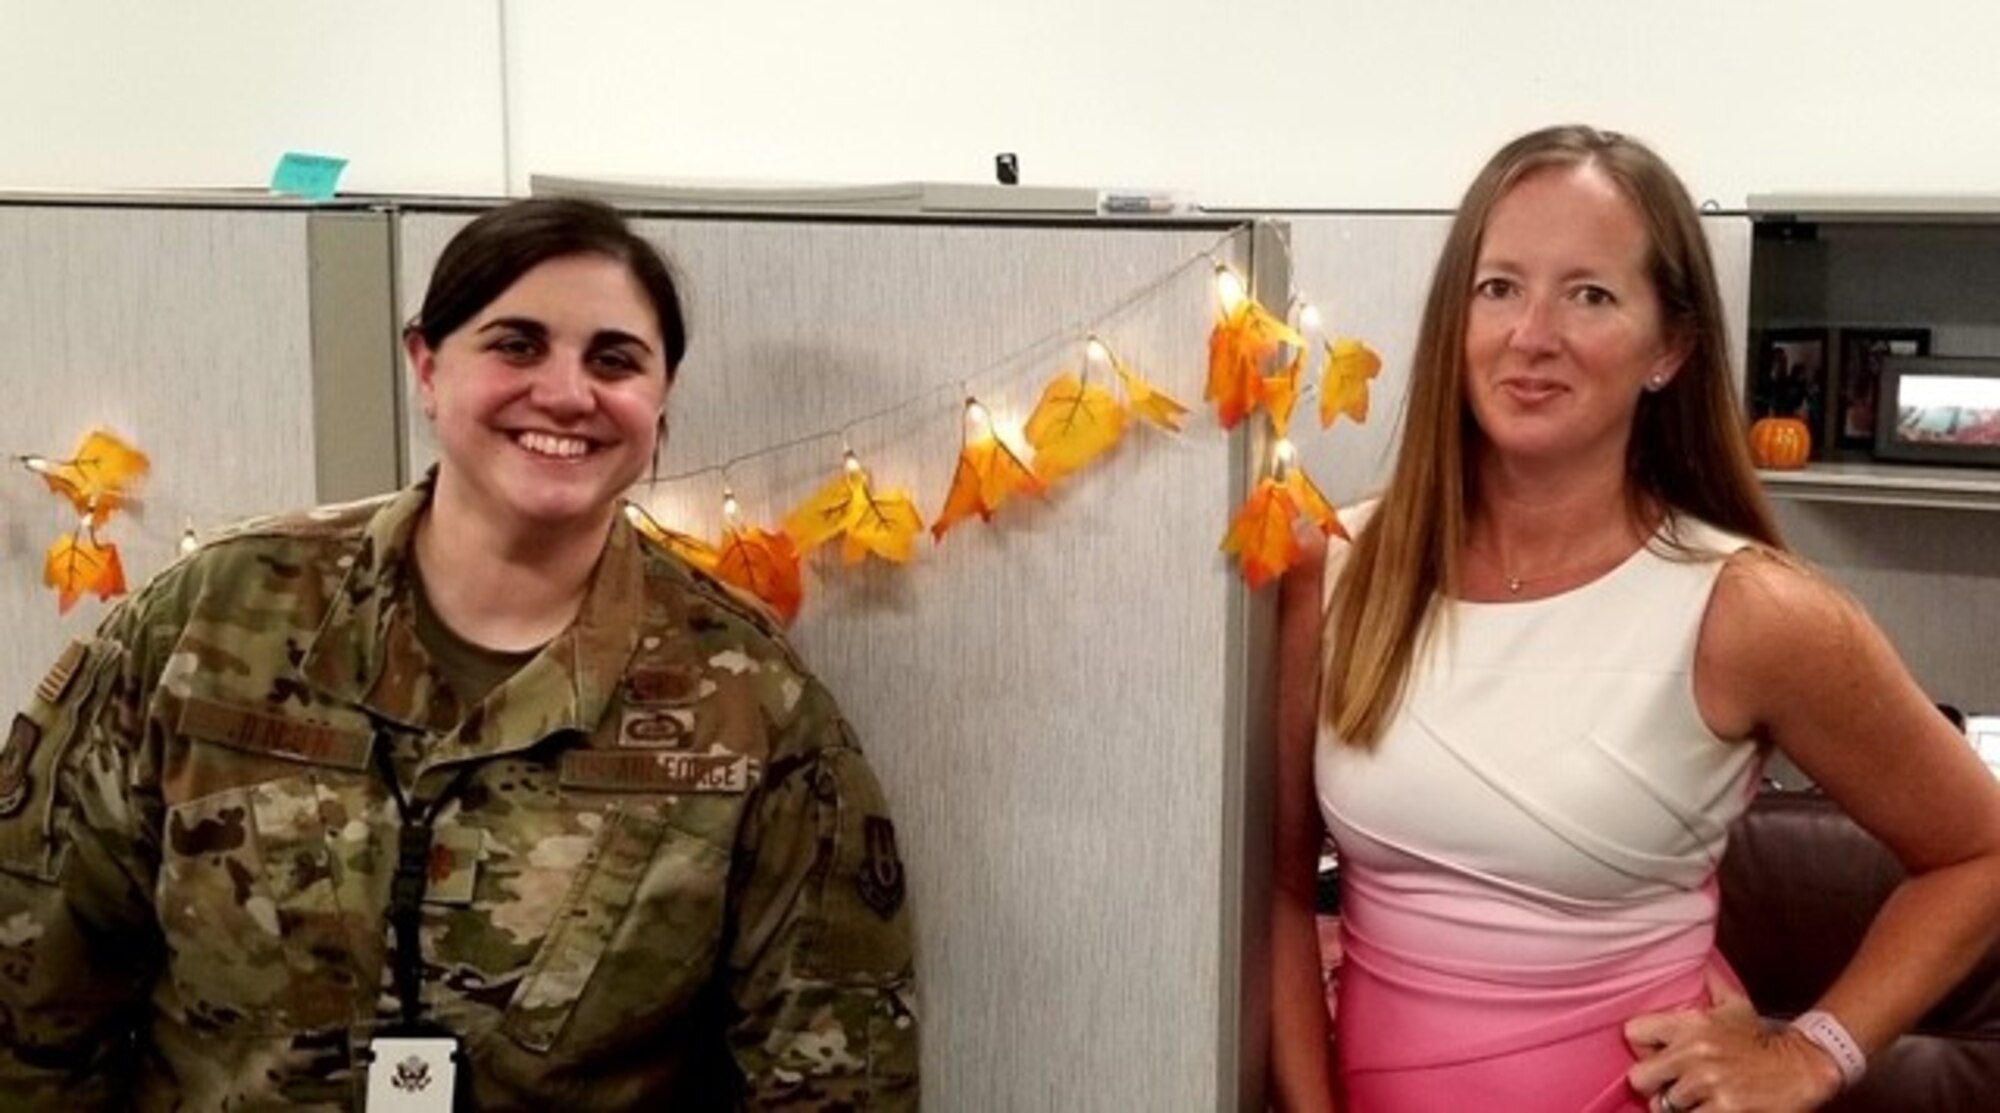 PM Maj. Jensen and CO Dana Alexander at Eglin AFB take a moment to relax during a busy workday.